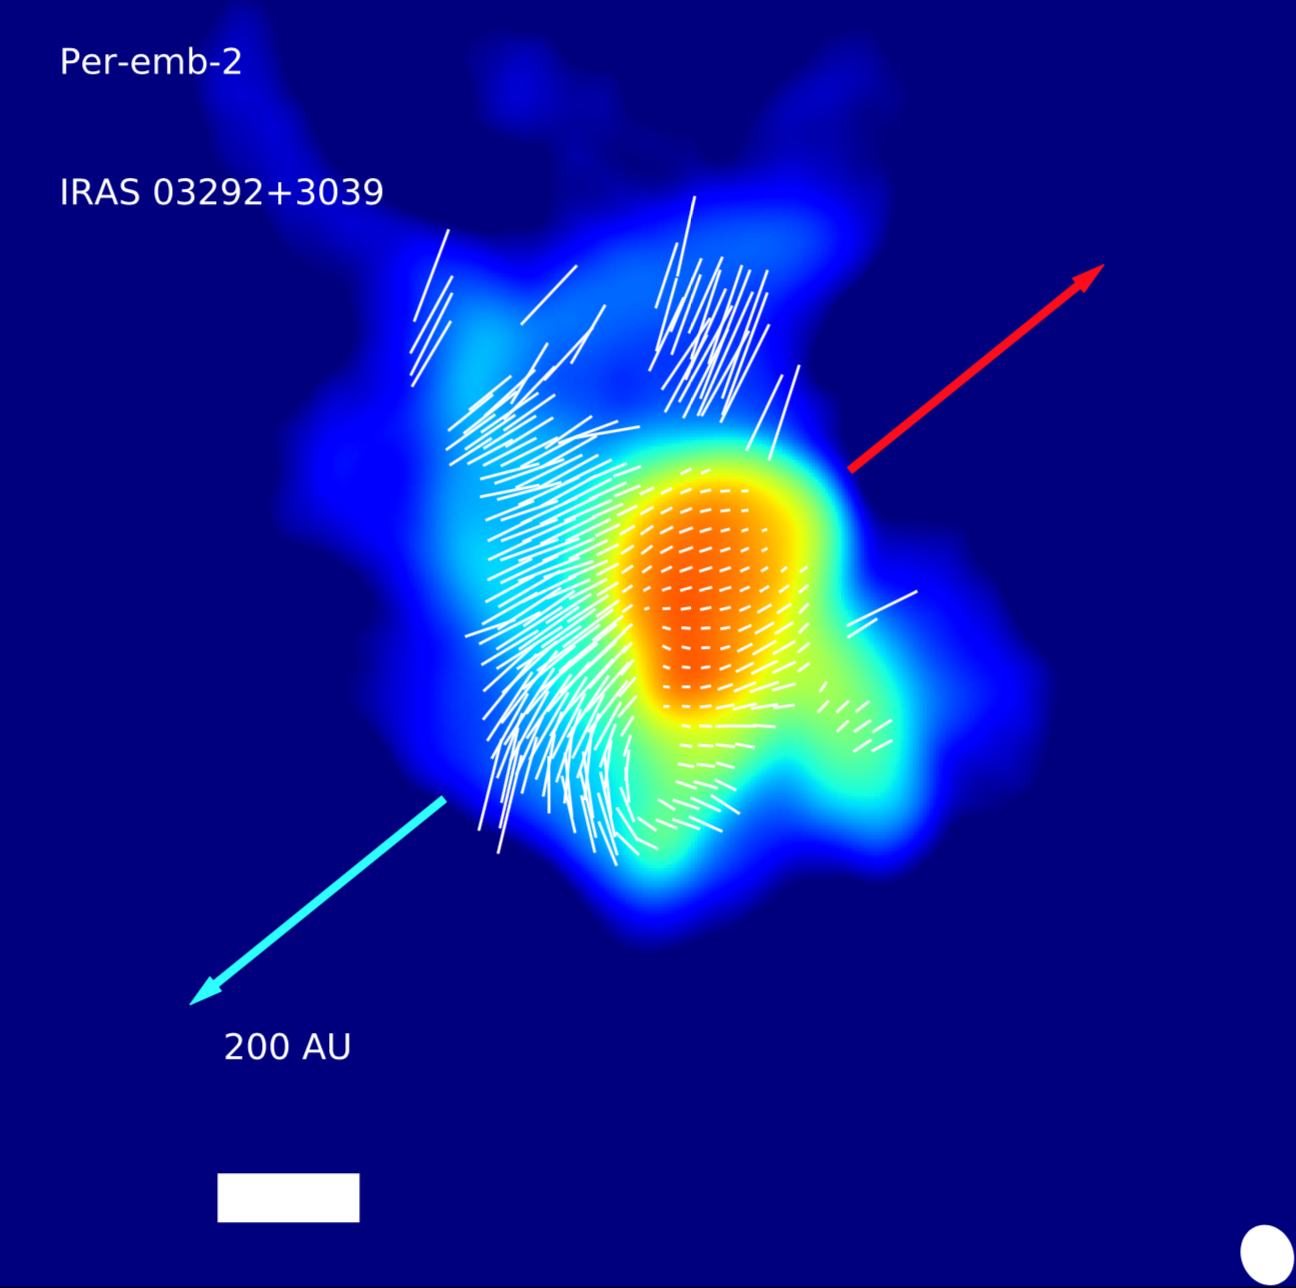 ALMA 870 micron observations of a young protostar in colorscale